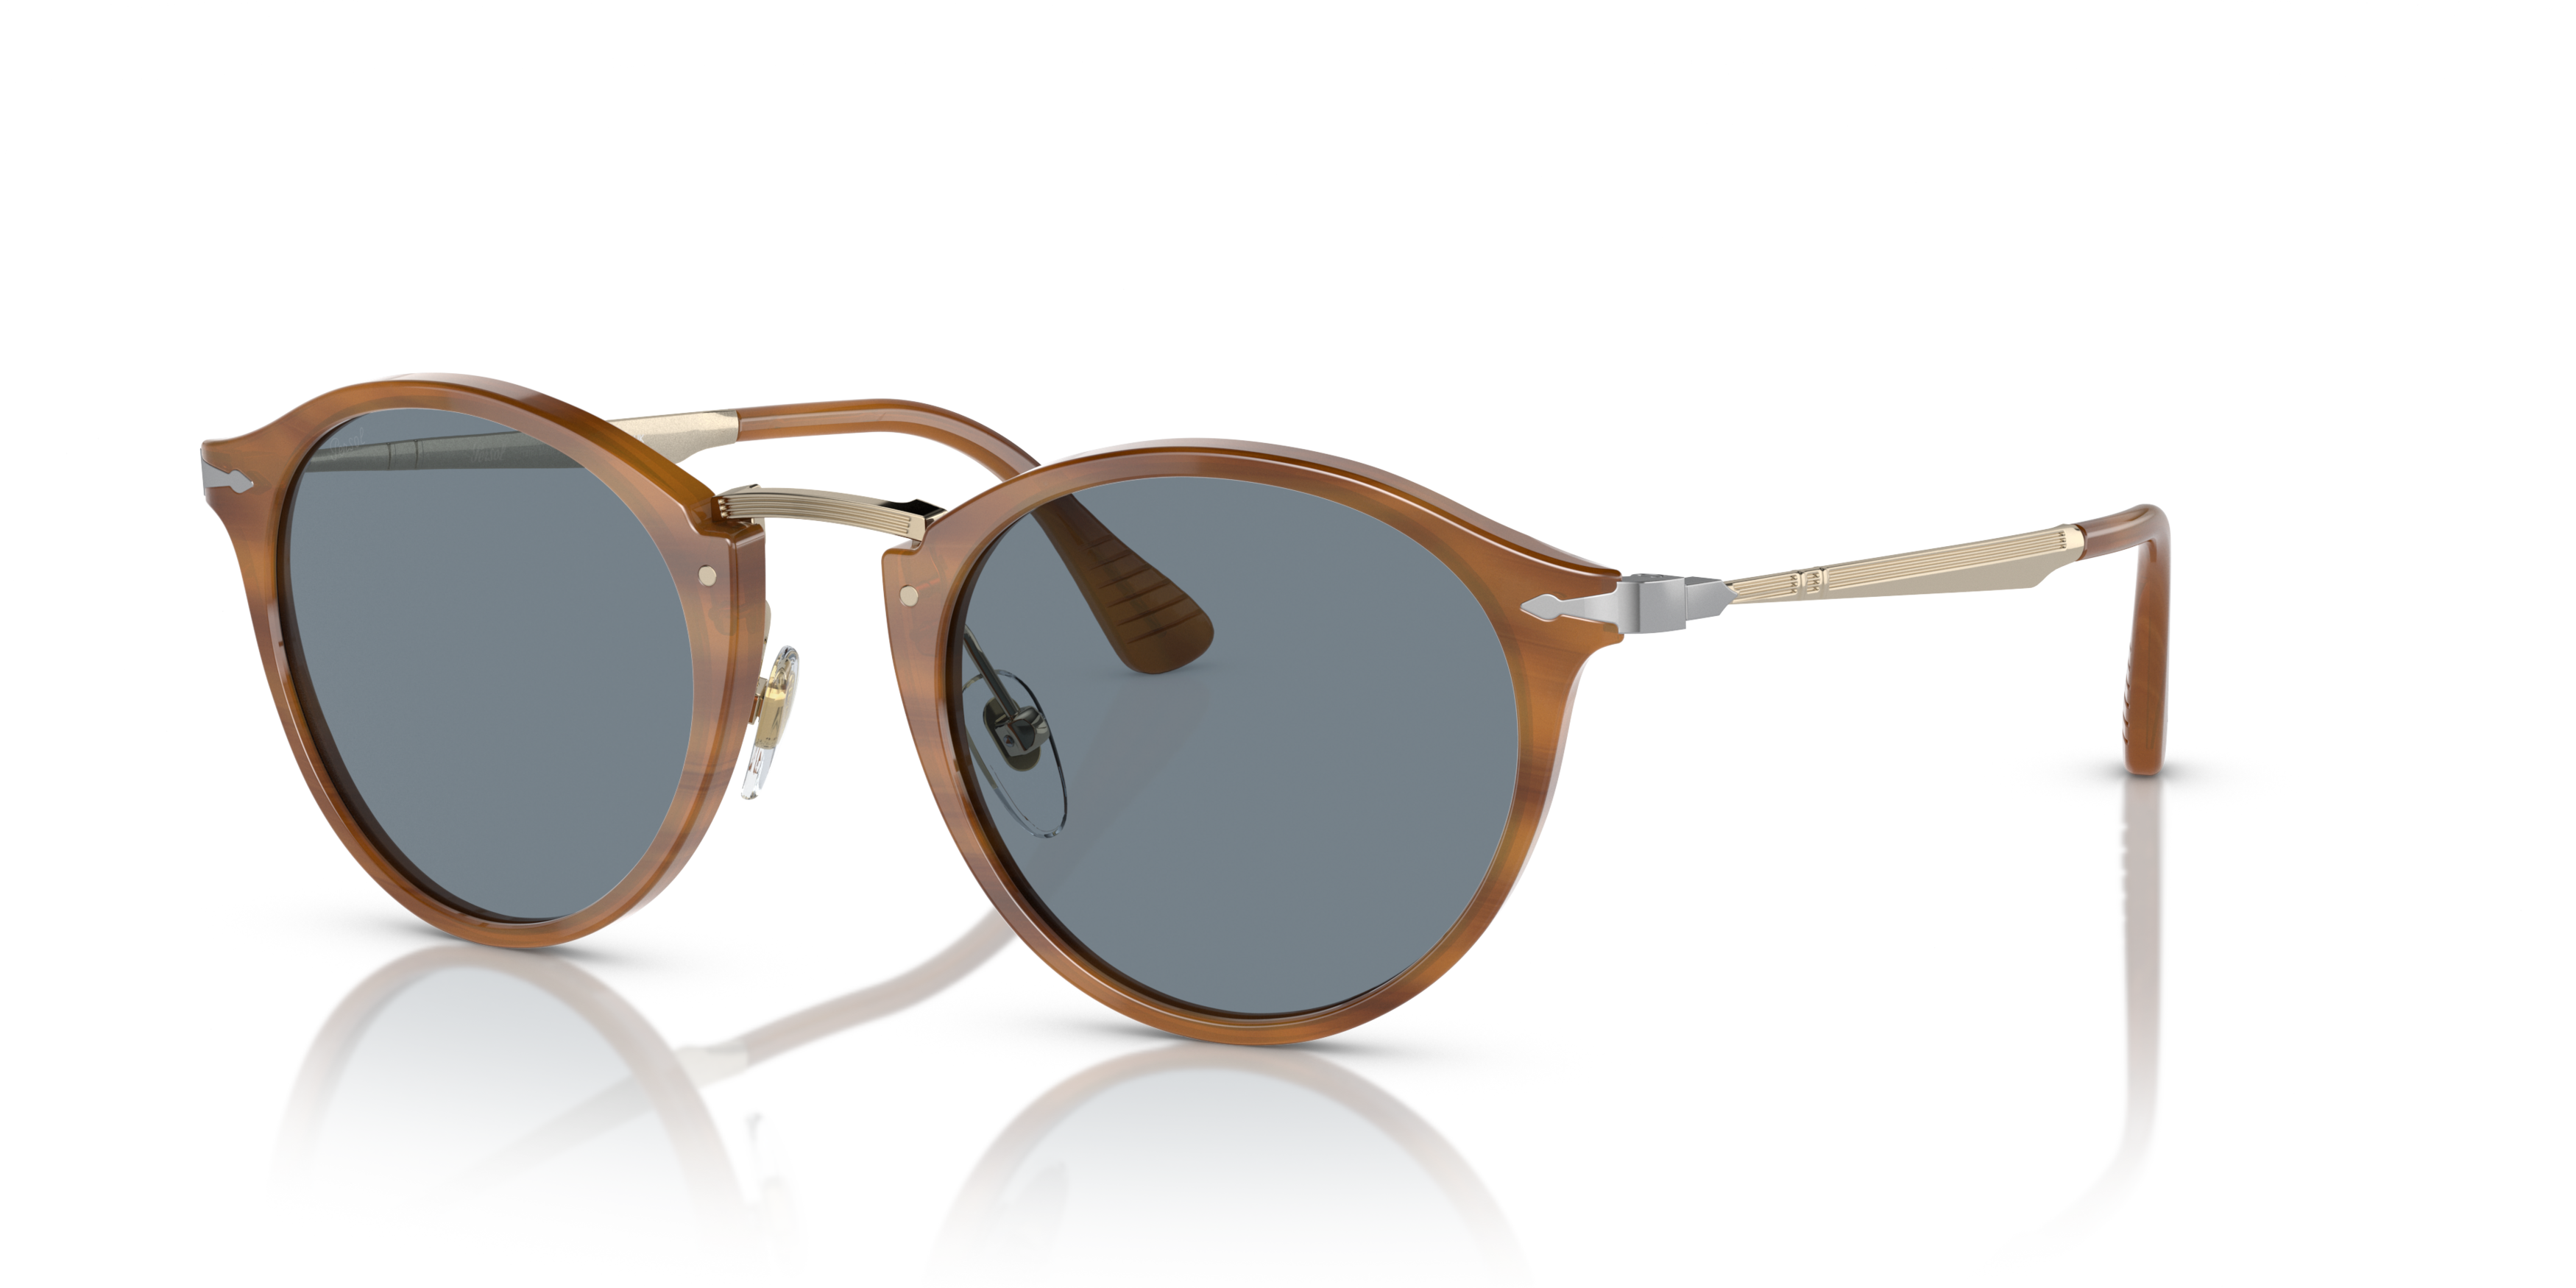 [products.image.angle_left01] Persol 0PO3166S 960/56